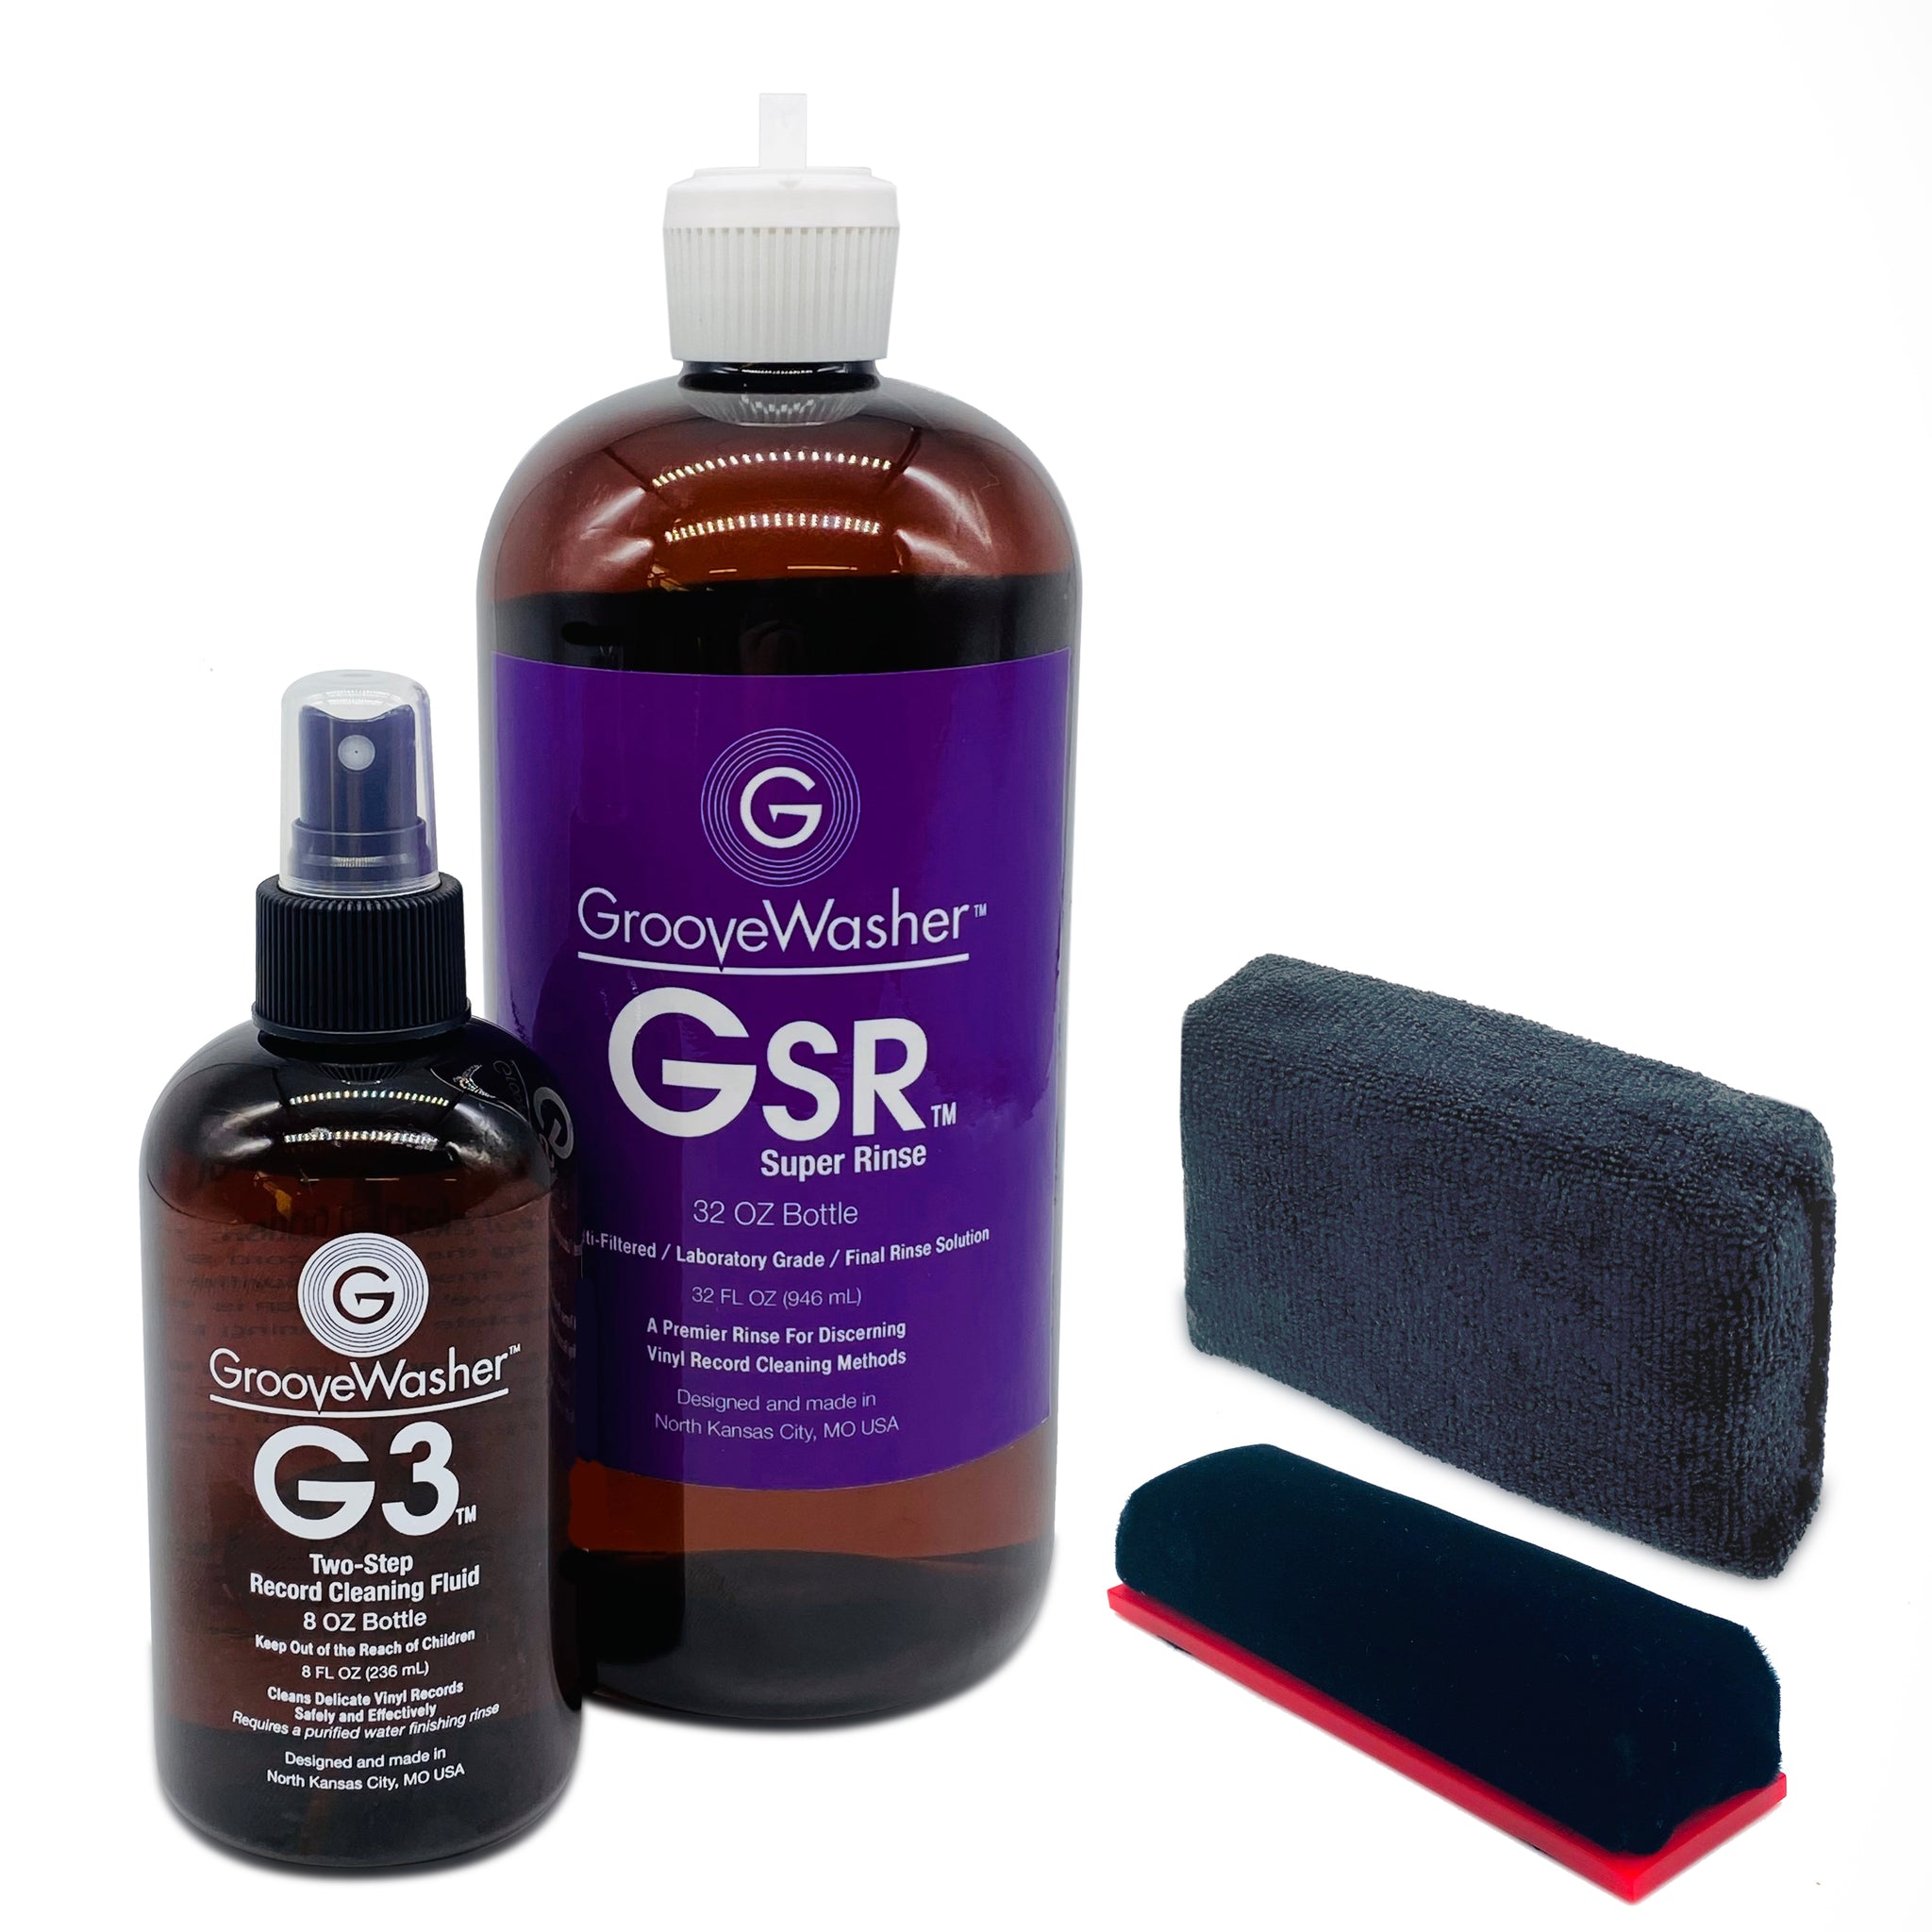 Gift Bundle | G3 Record Cleaning Fluid & GSR Rinse with Black Magic Pad